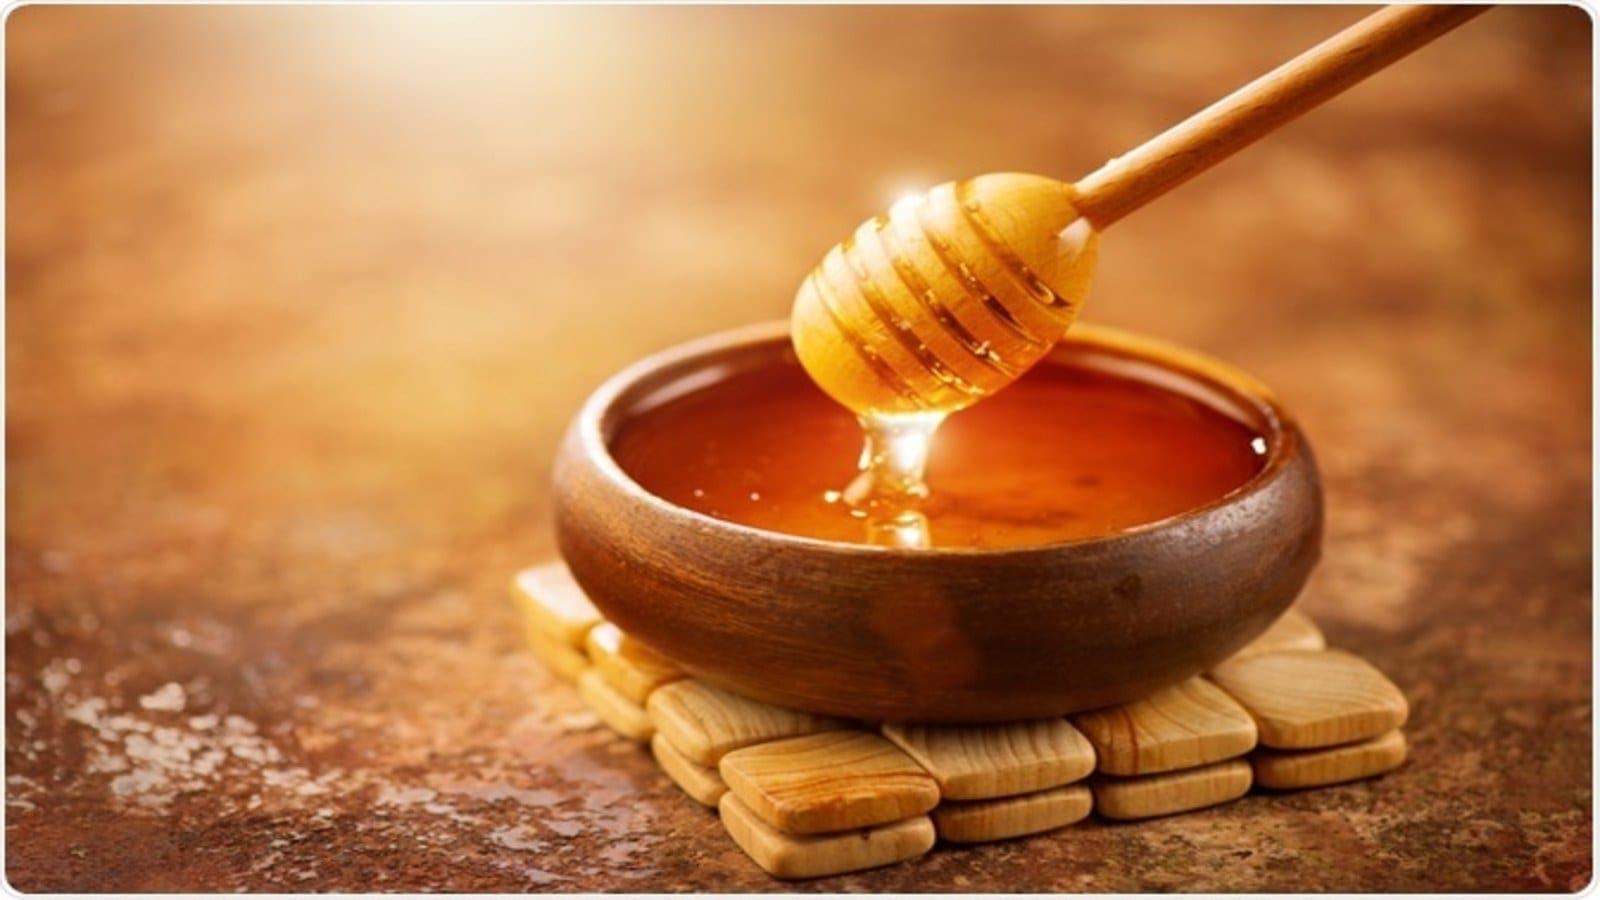 Tanzanian honey processing firm invests in modern facilities, EU launches US$10m initiative to boost production of sweetener